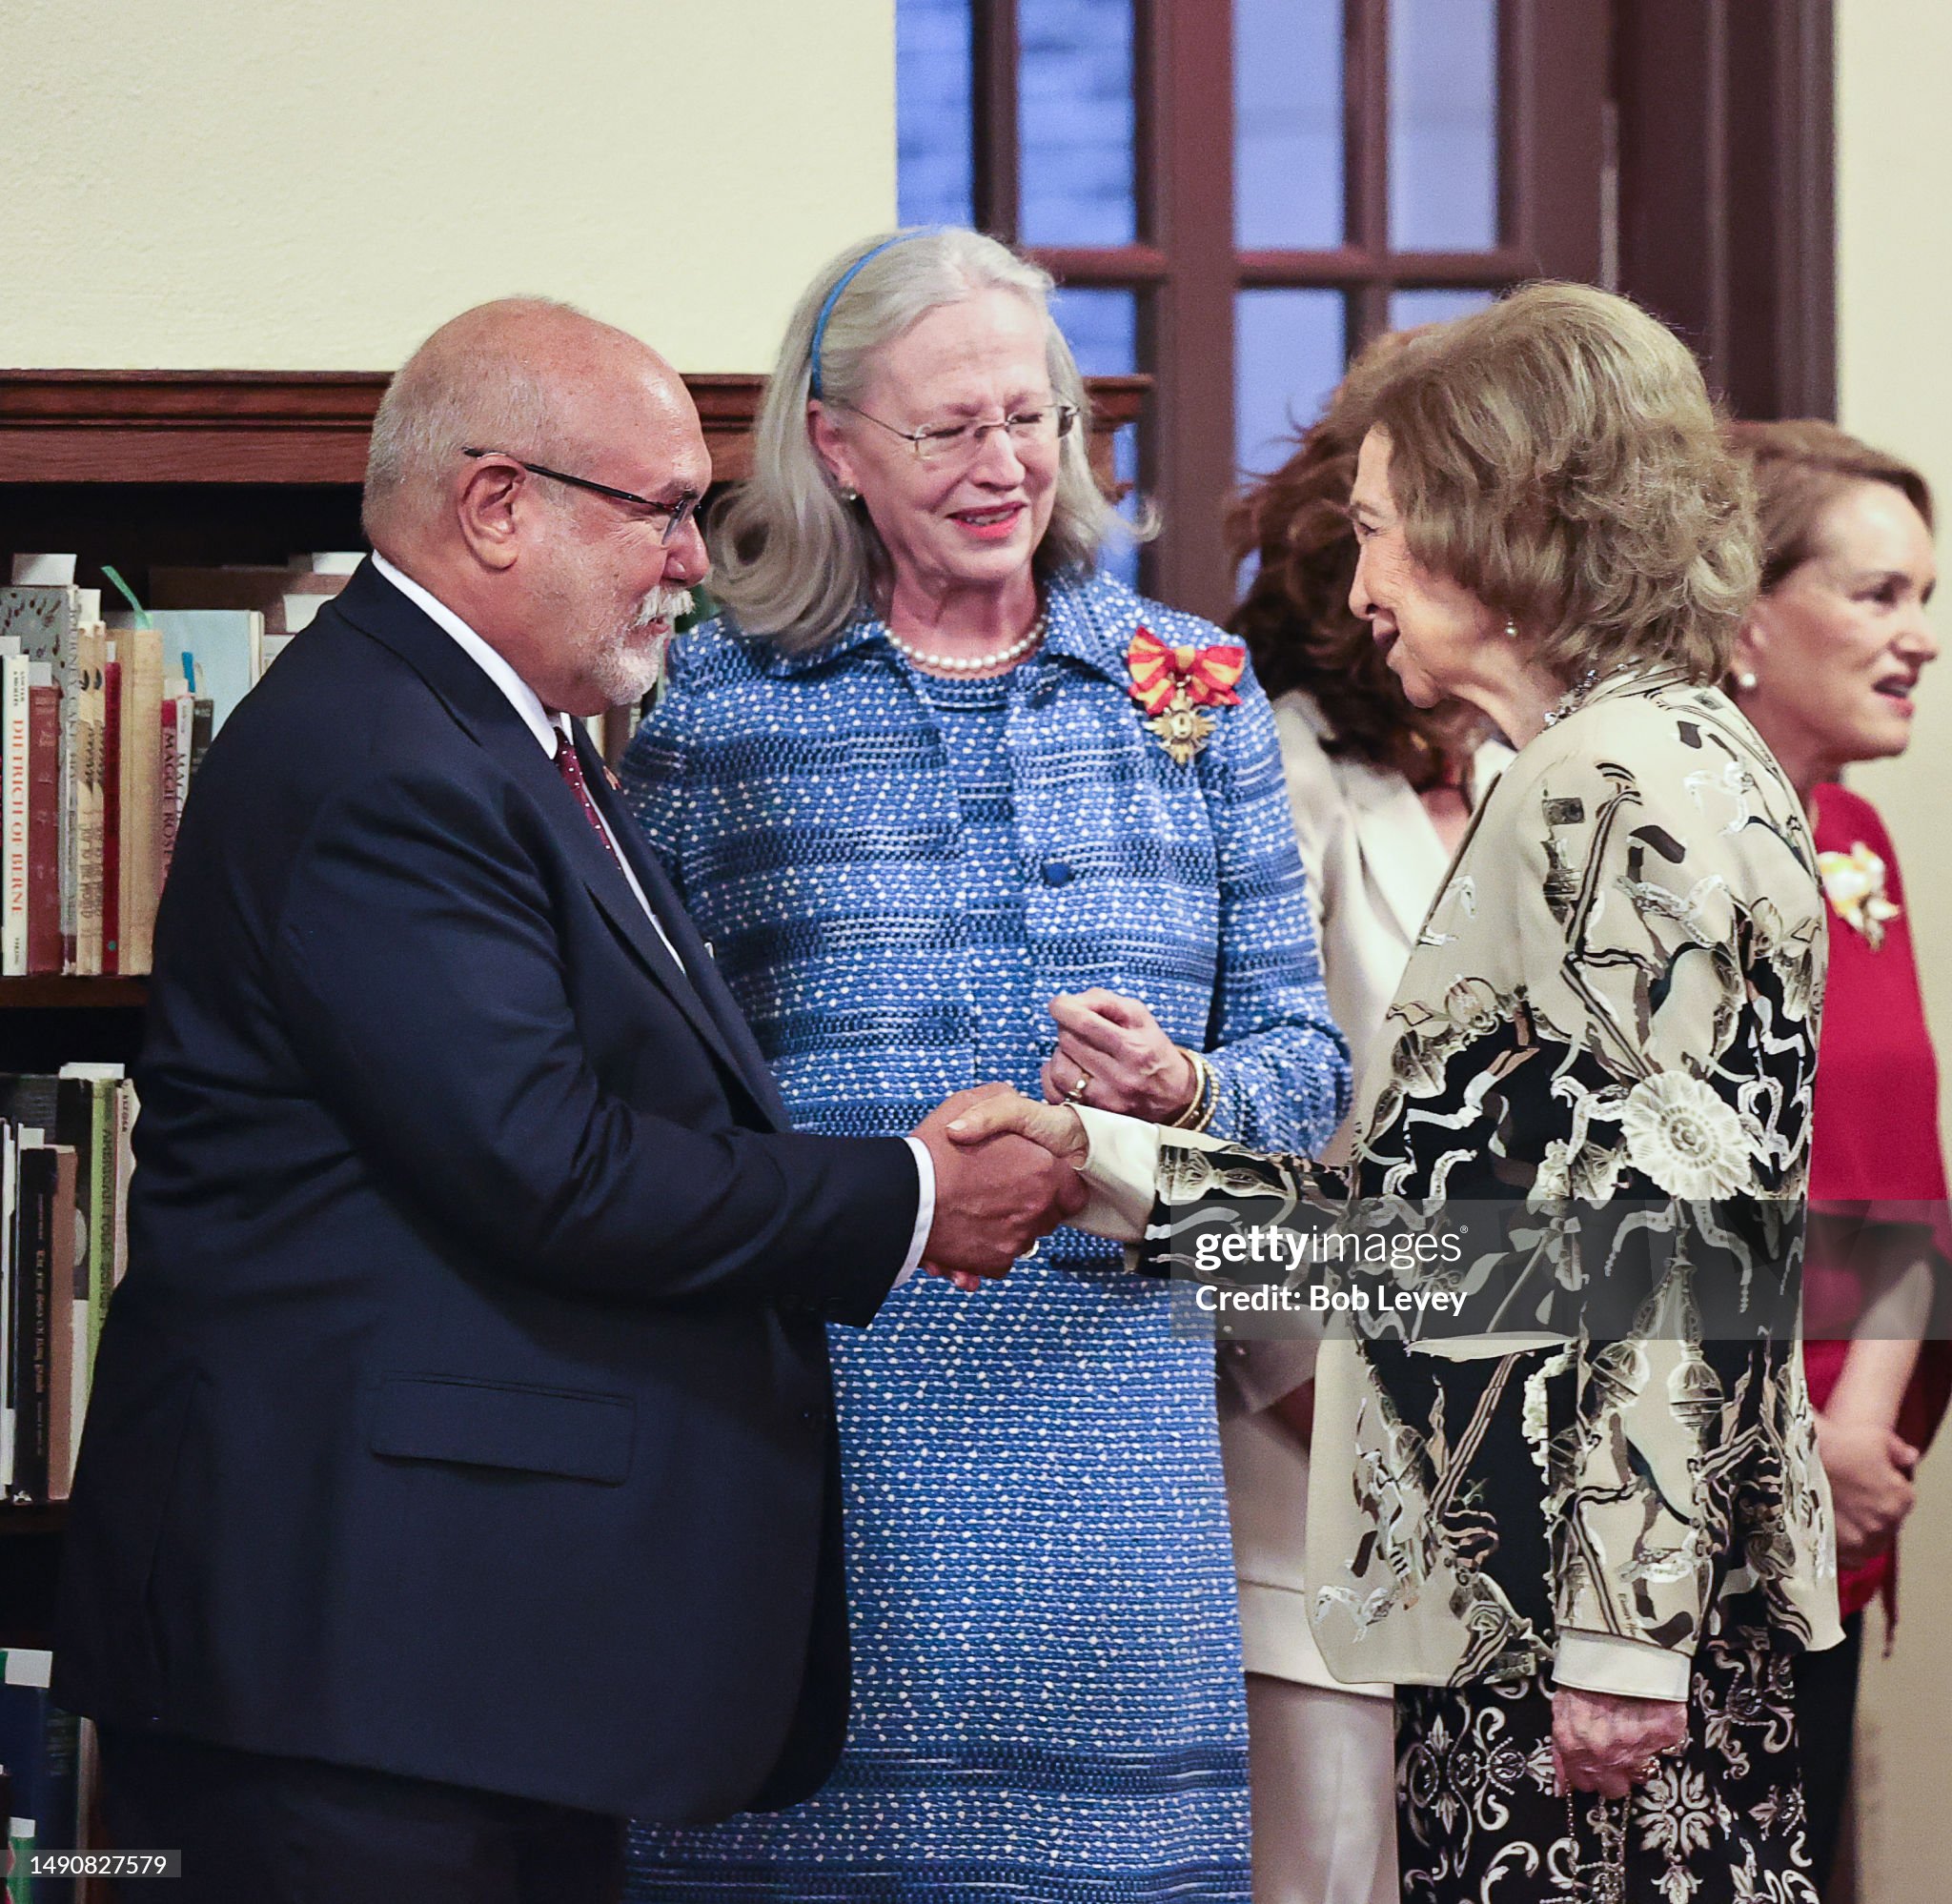 queen-sofia-of-spain-meets-with-guests-at-julia-ideson-building-on-may-16-2023-in-houston-texas.jpg